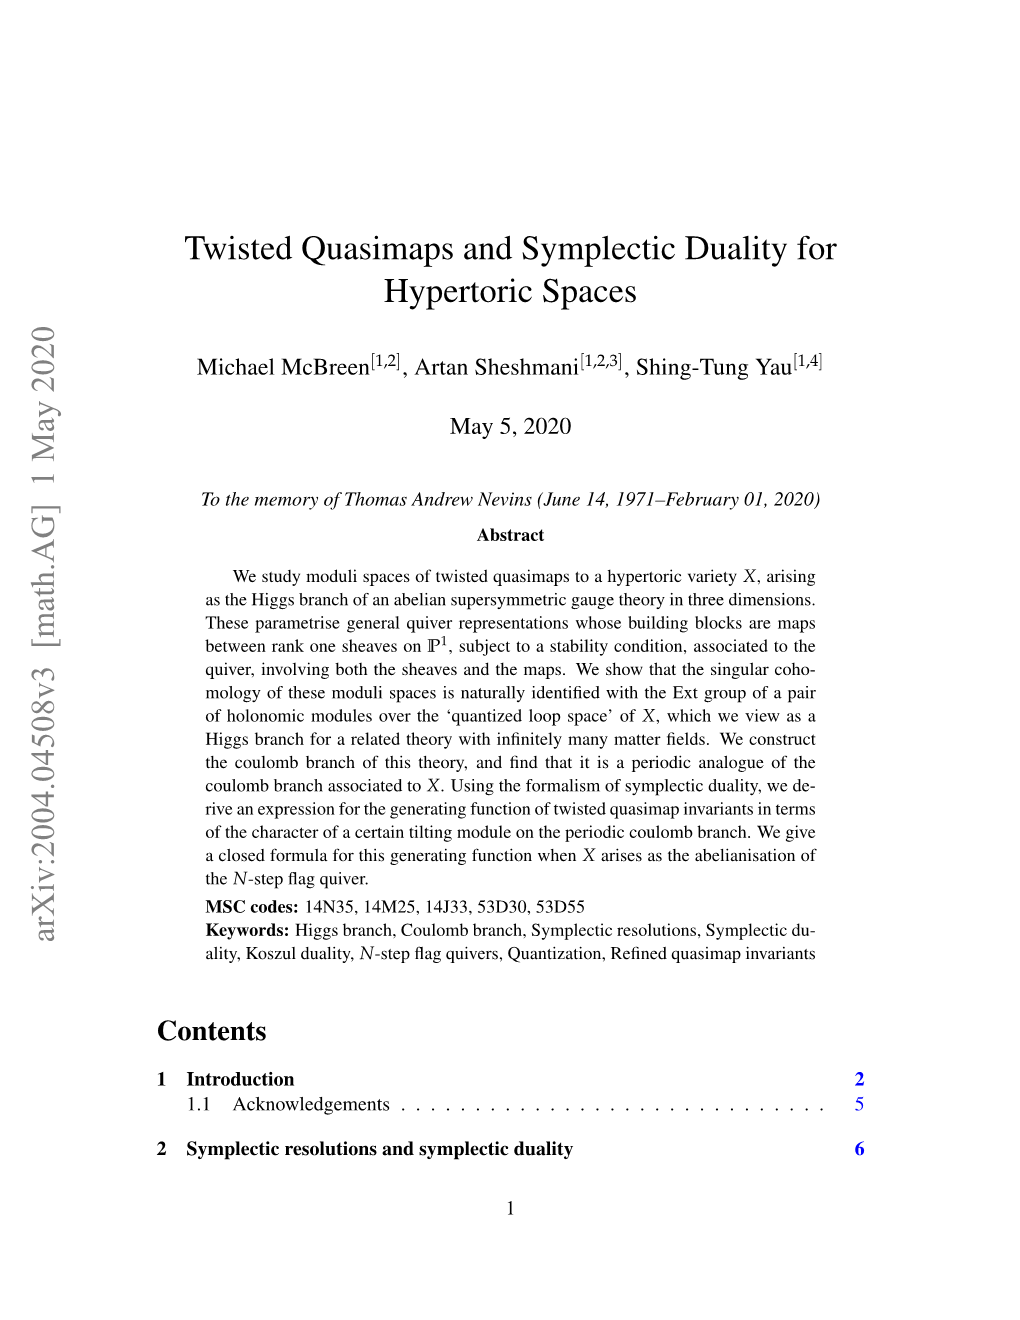 Twisted Quasimaps and Symplectic Duality for Hypertoric Spaces Arxiv